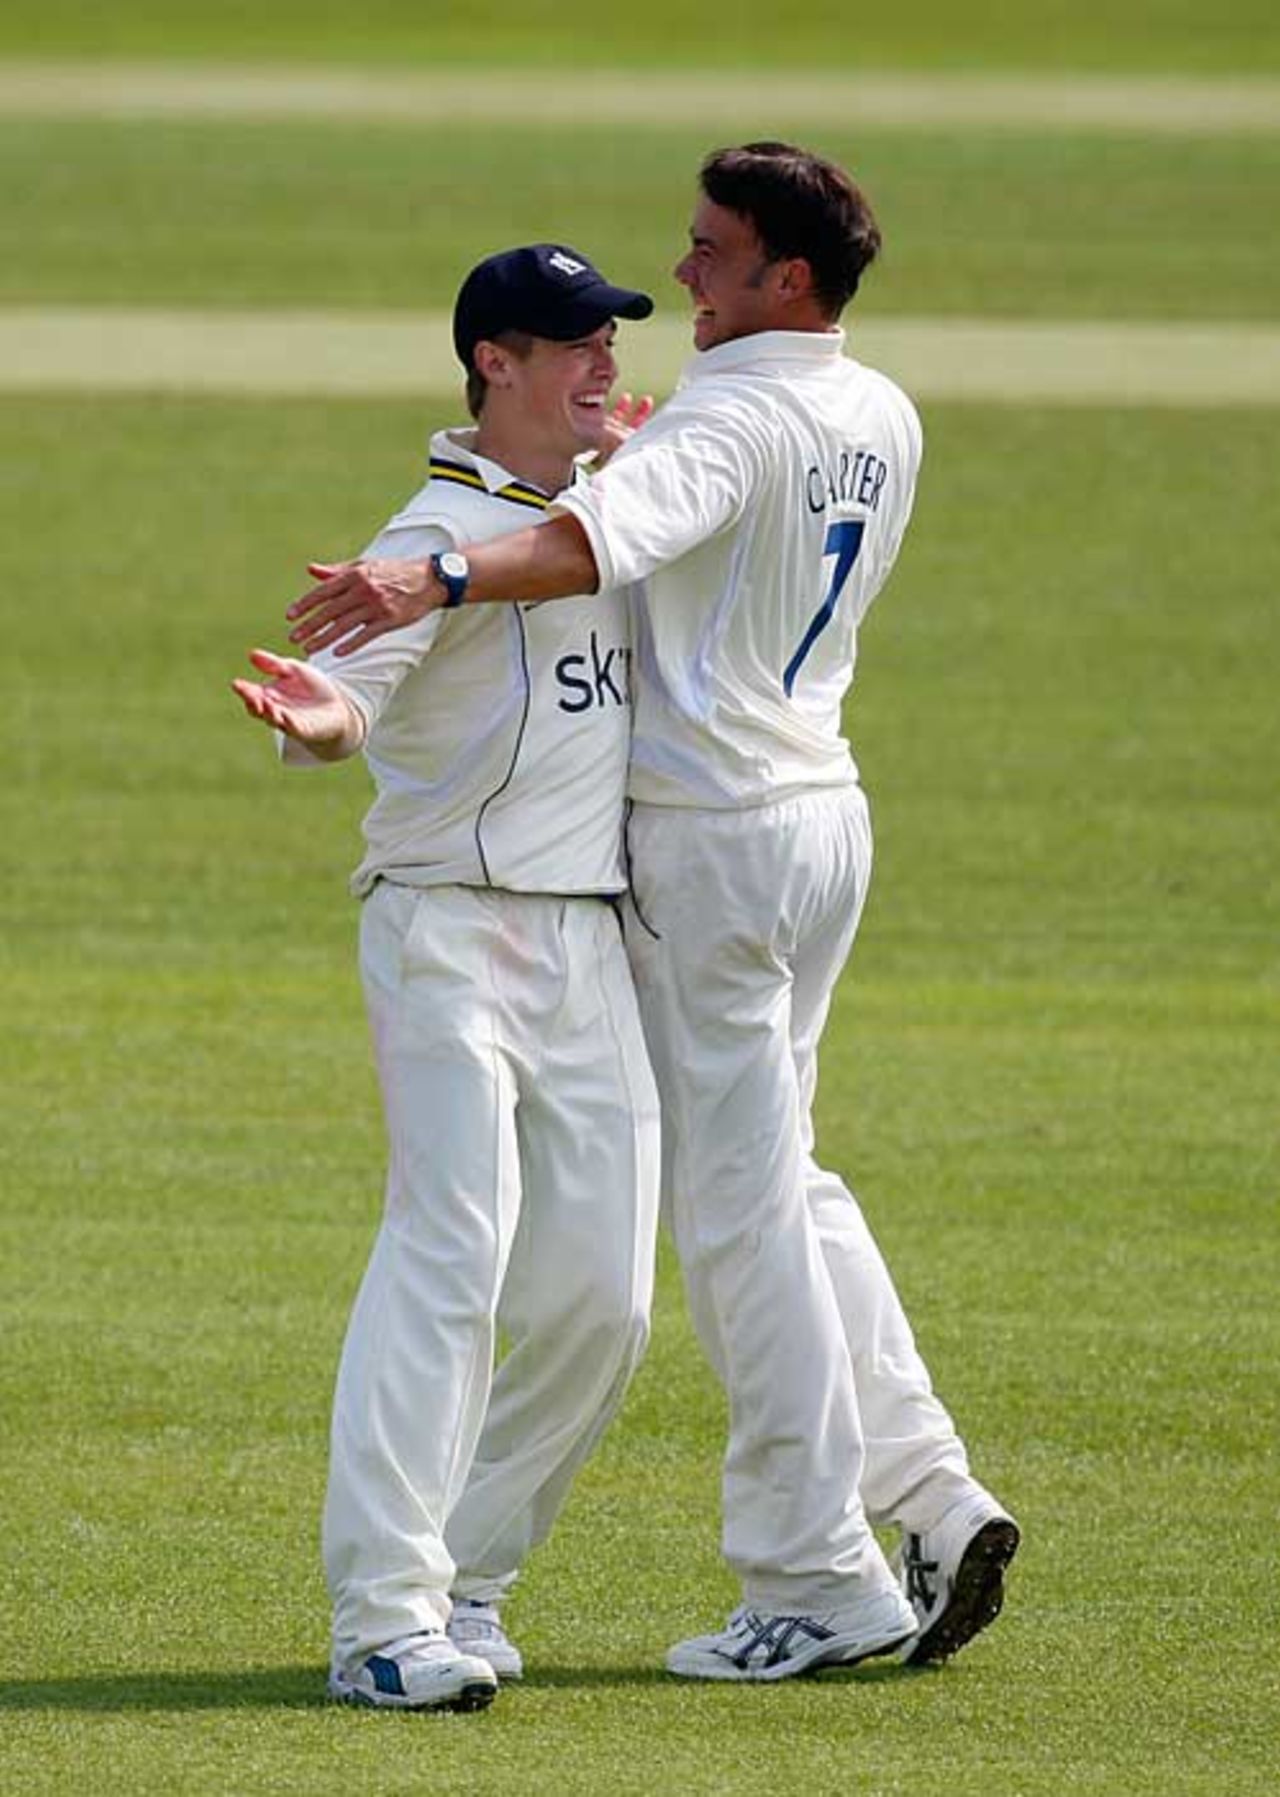 Neil Carter (r) and Chris Woakes removed Jonathan Bairstow, Warwickshire v Yorkshire, County Championship Division One, Edgbaston, April 10, 2010